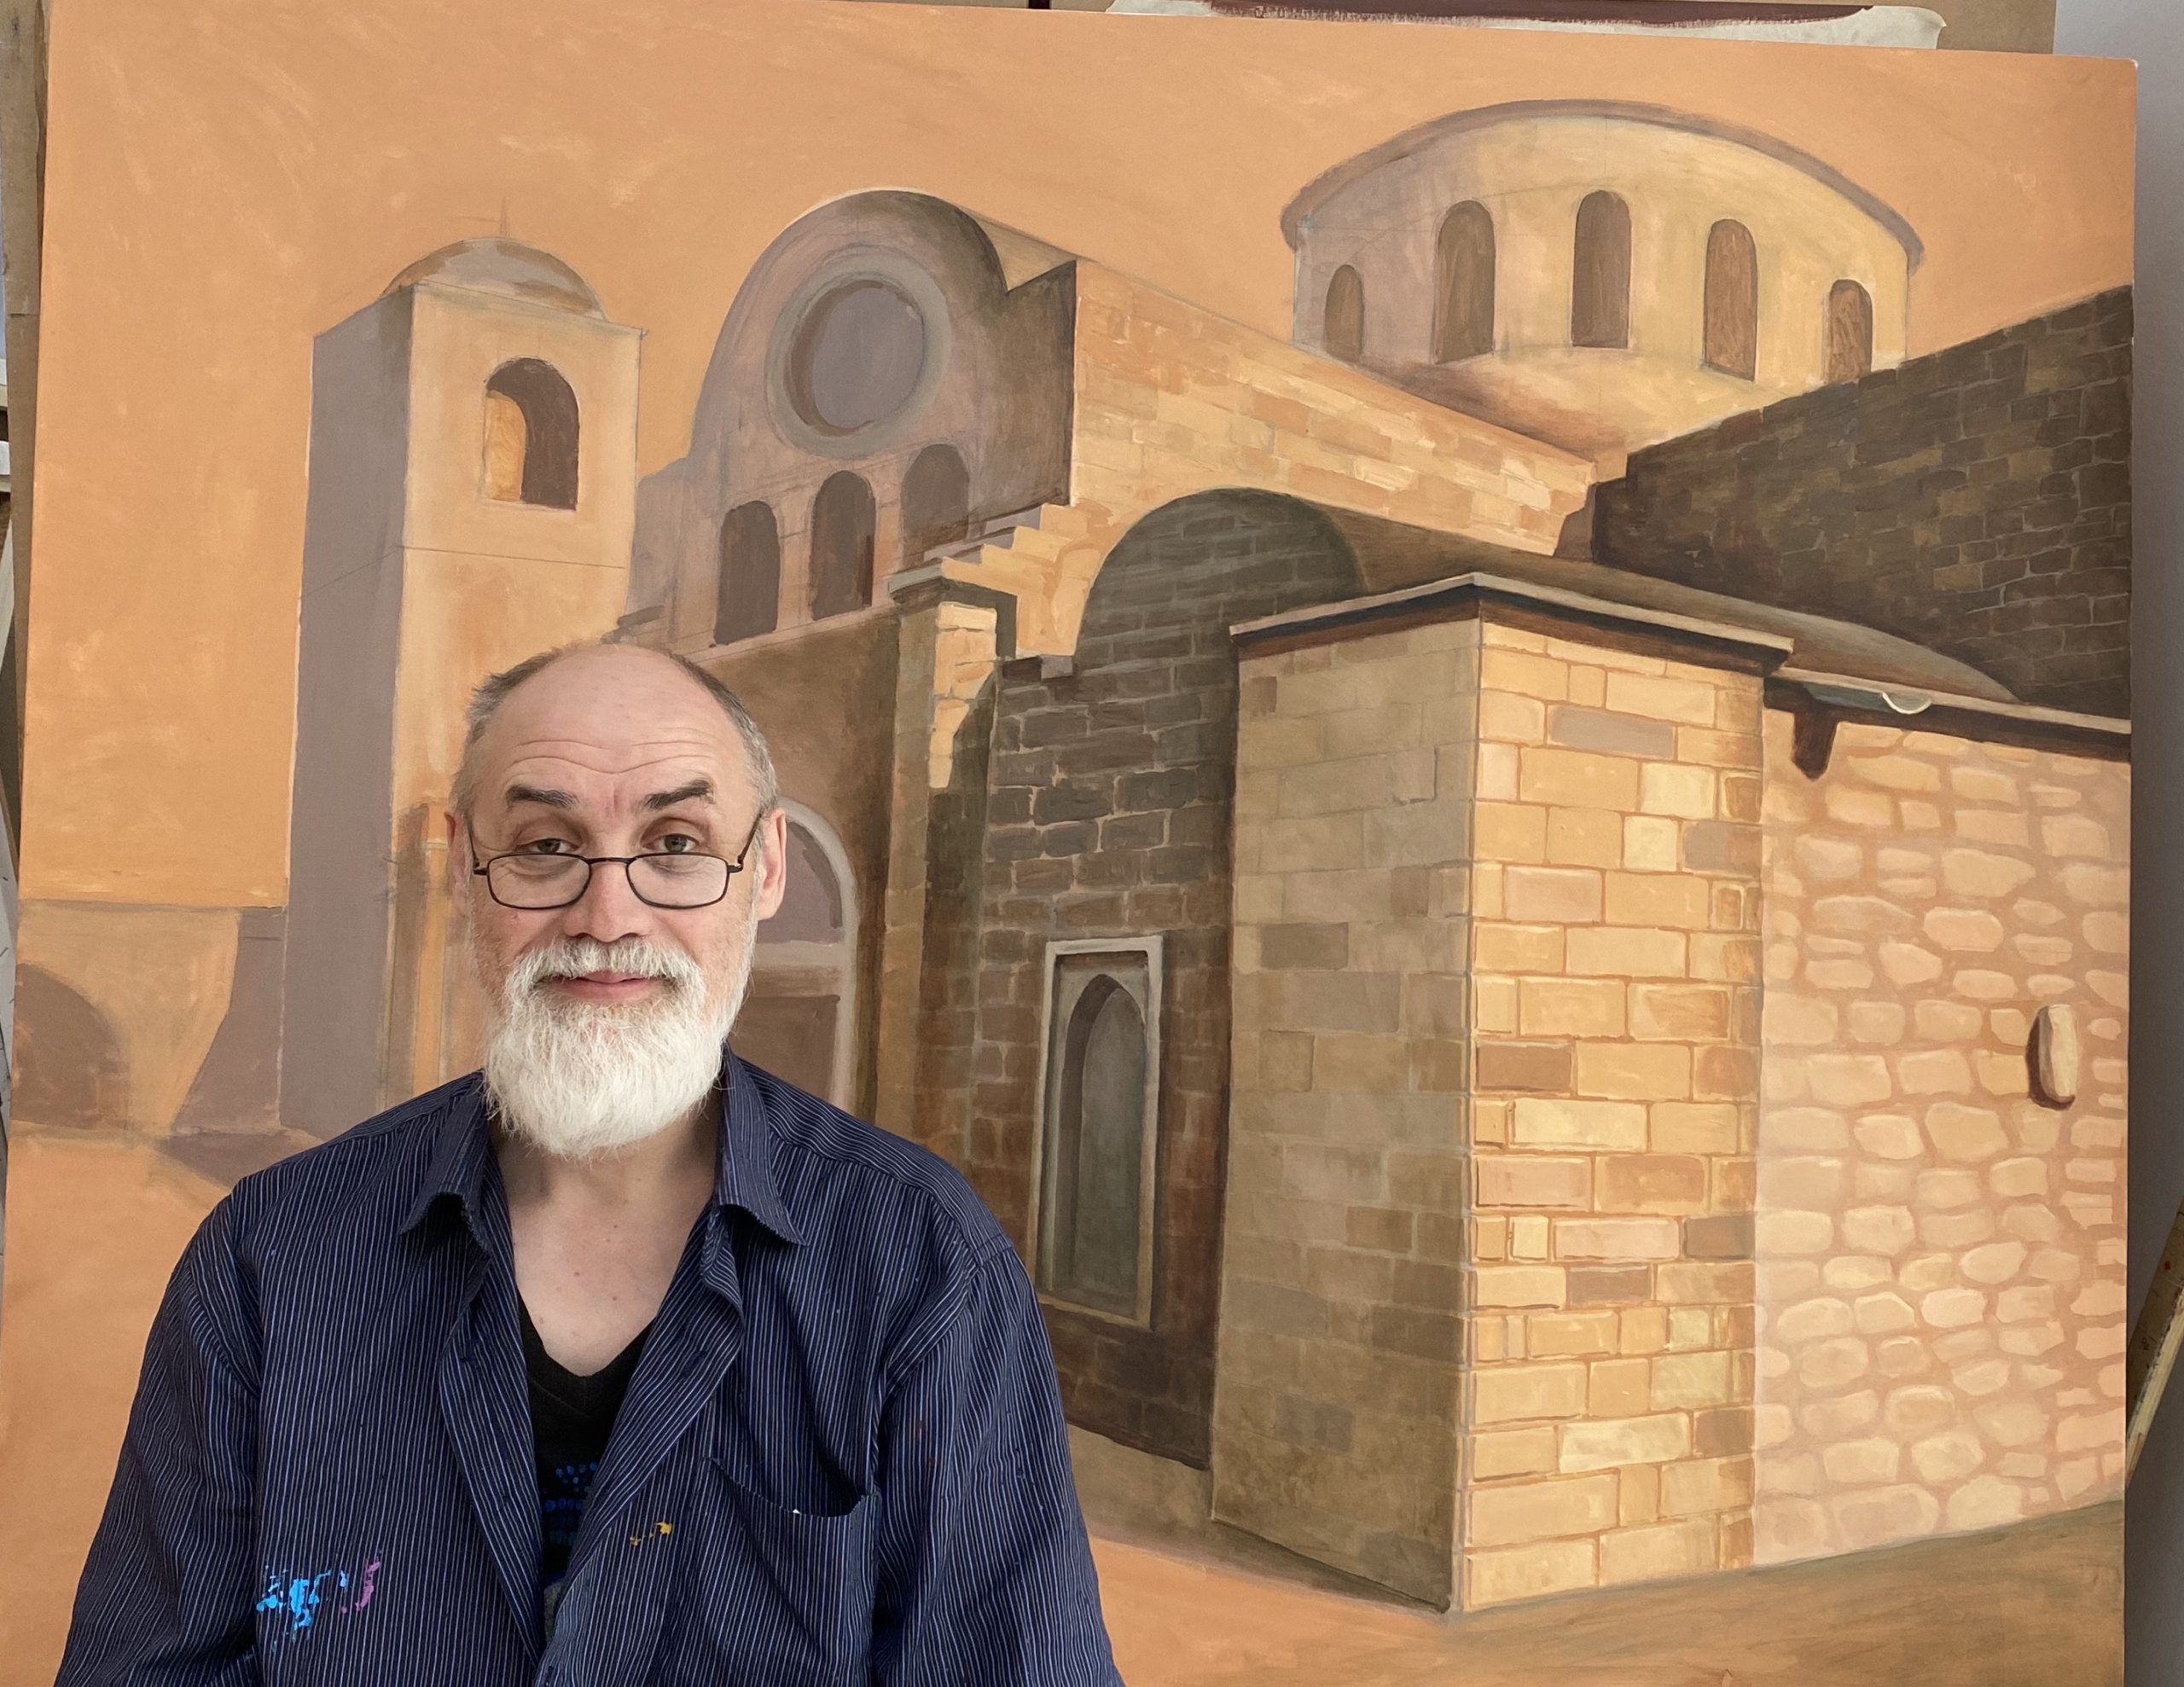 Artist Igor Gushchin depicted the Apostolos Andreas Monastery, Twin Churches and Paphos Castle for the Cyprus Museum of Modern Arts during quarantine days